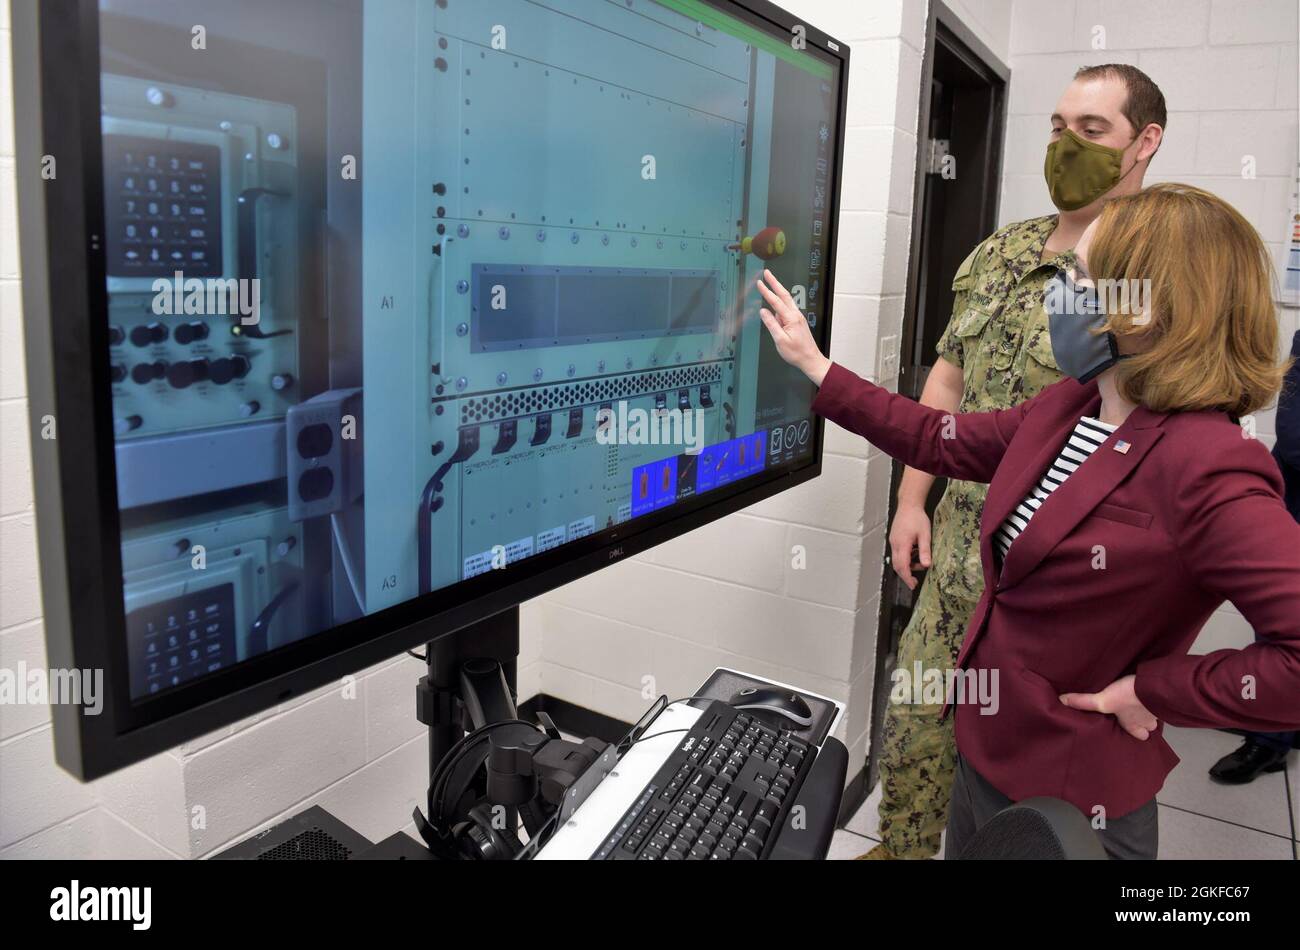 210408-N-XX139-0059 PENSACOLA, Fla. (April 8, 2020) Deputy Secretary of Defense Kathleen H. Hicks participates in a Multipurpose Reconfigurable Training System 3D® (MRTS 3D®) technology training device demonstration and discussion with staff at the Center for Information Warfare Training and Information Warfare Training Command (IWTC) Corry Station. Hicks, along with members of her staff, visited for a familiarization brief and tour of CIWT and IWTC Corry Station onboard Naval Air Station Pensacola Corry Station, Pensacola, Florida. The visit offered an opportunity to update them on CIWT / IWT Stock Photo